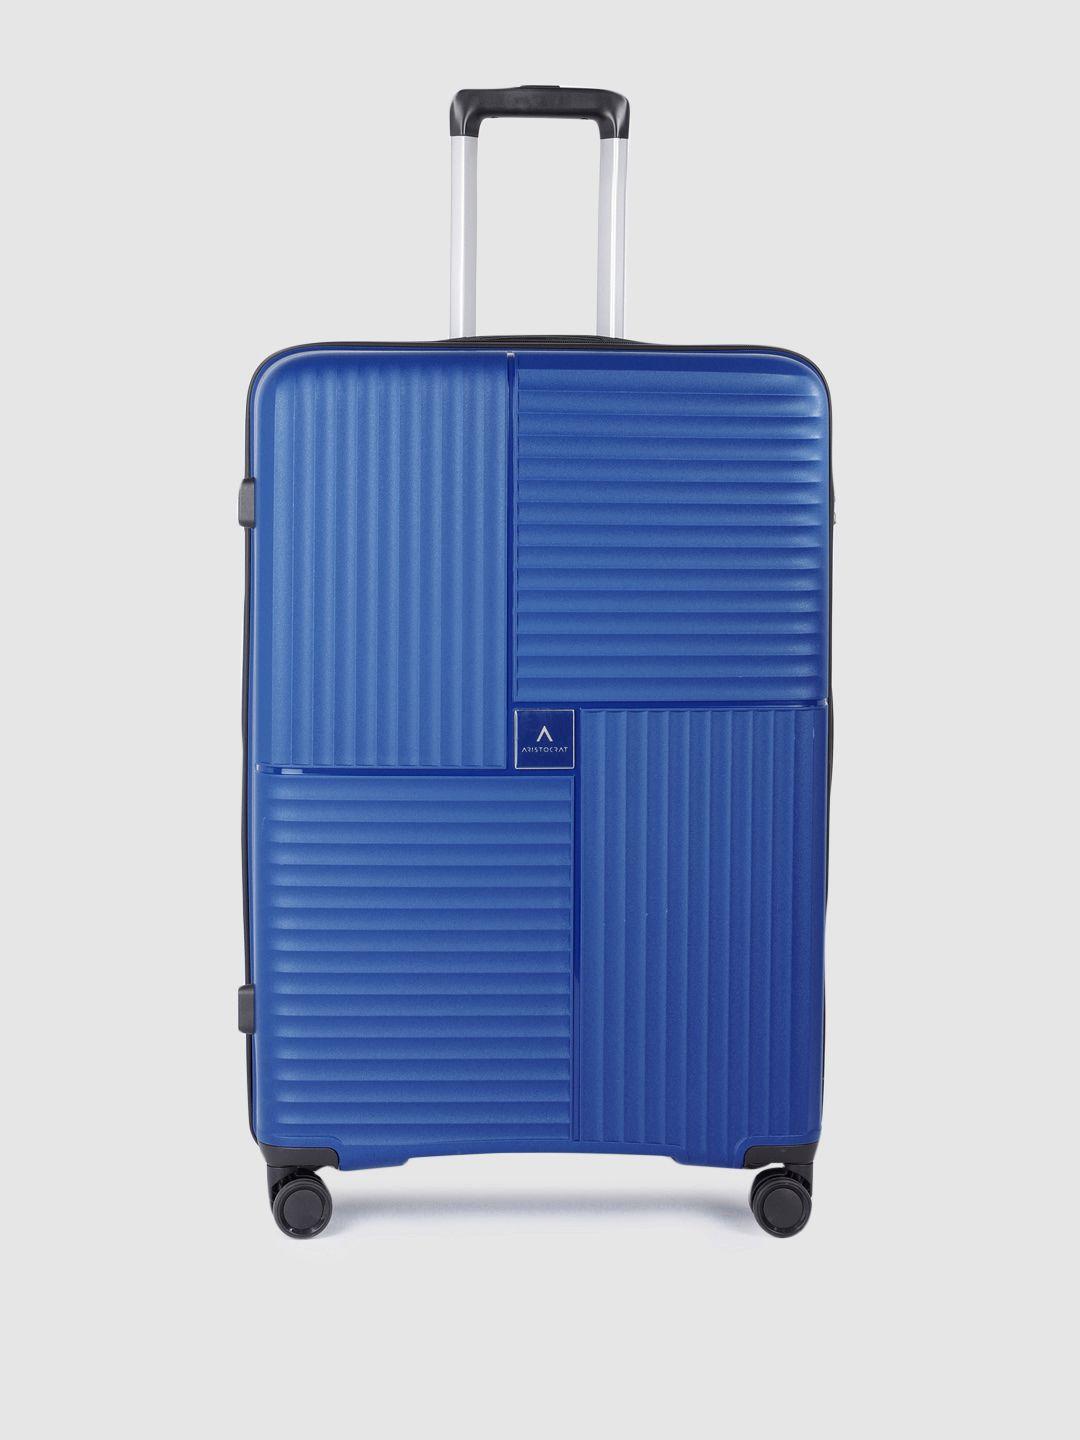 aristocrat-textured-hard-sided-large-trolley-suitcase